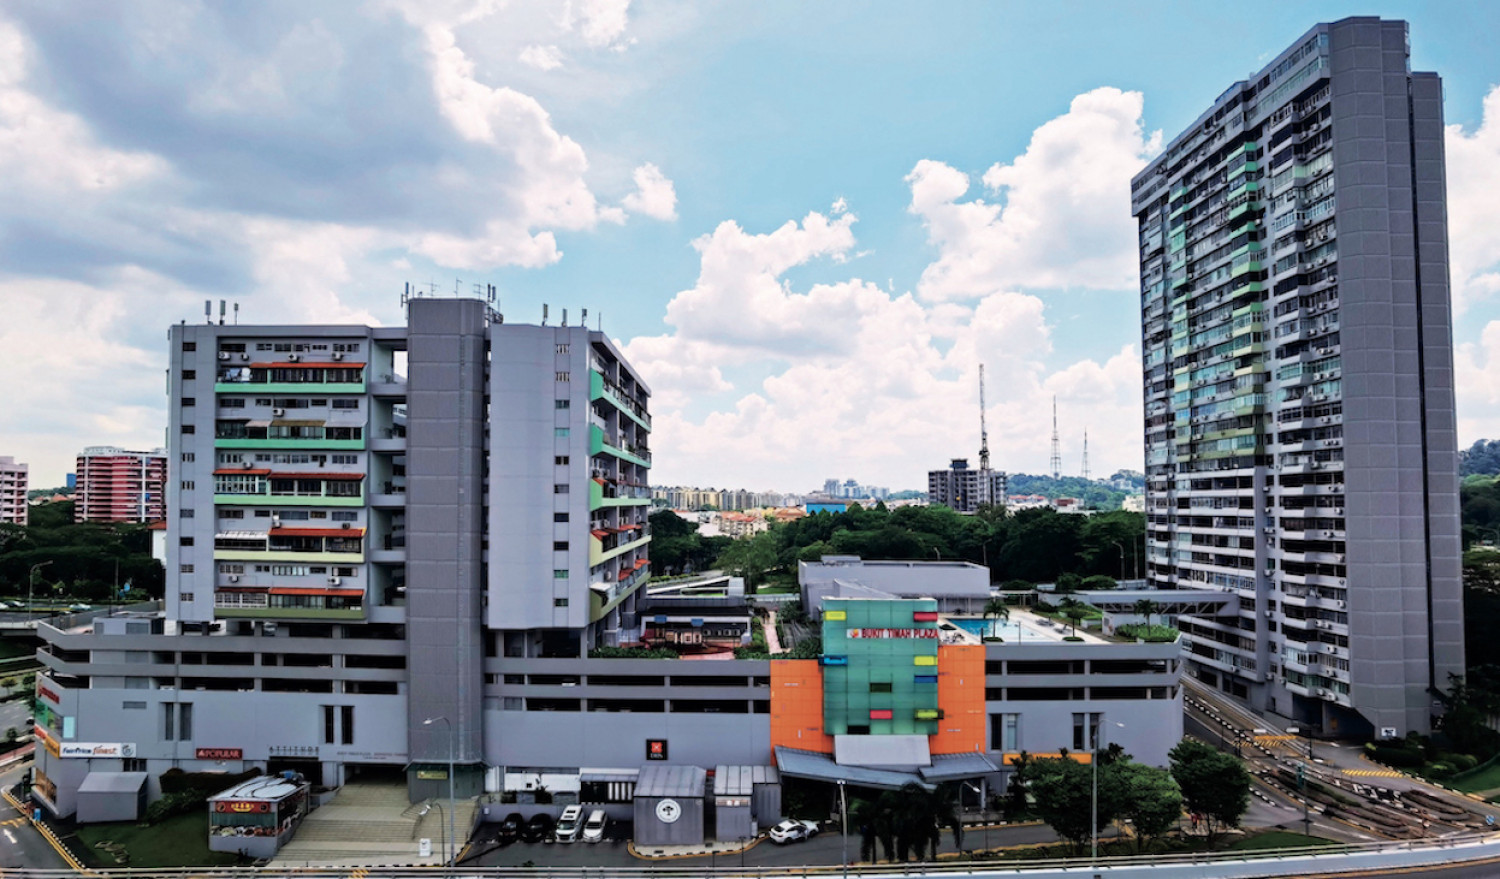 [UPDATE] Keppel to sell strata-titled carpark at Bukit Timah Plaza - Property News